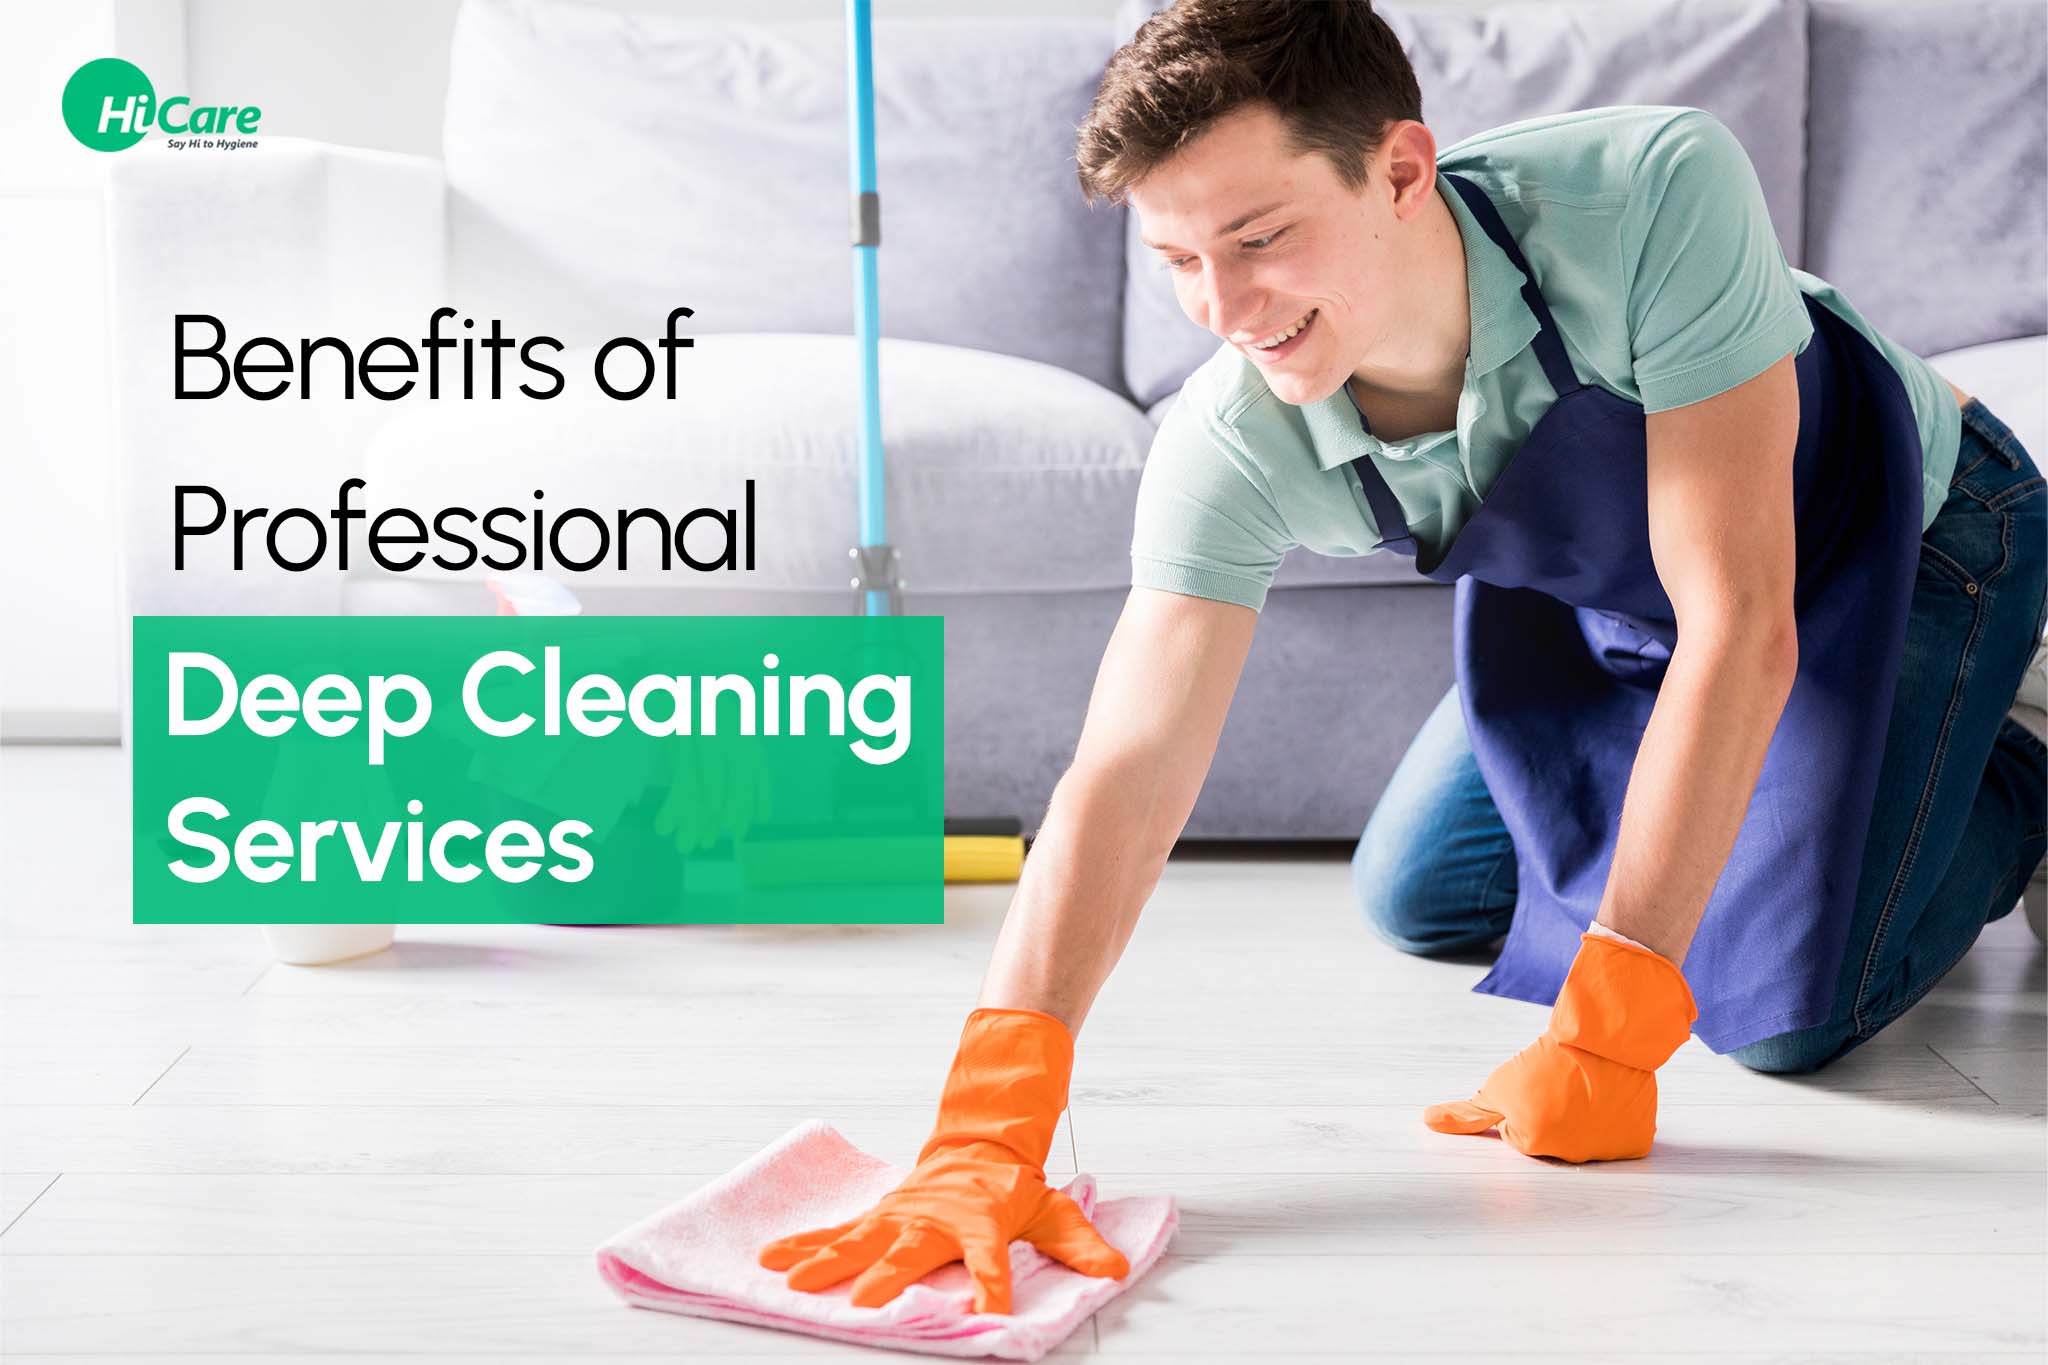 https://hicare.in/blog/wp-content/uploads/2023/01/benefits-of-professional-deep-cleaning-services-hicare.jpg